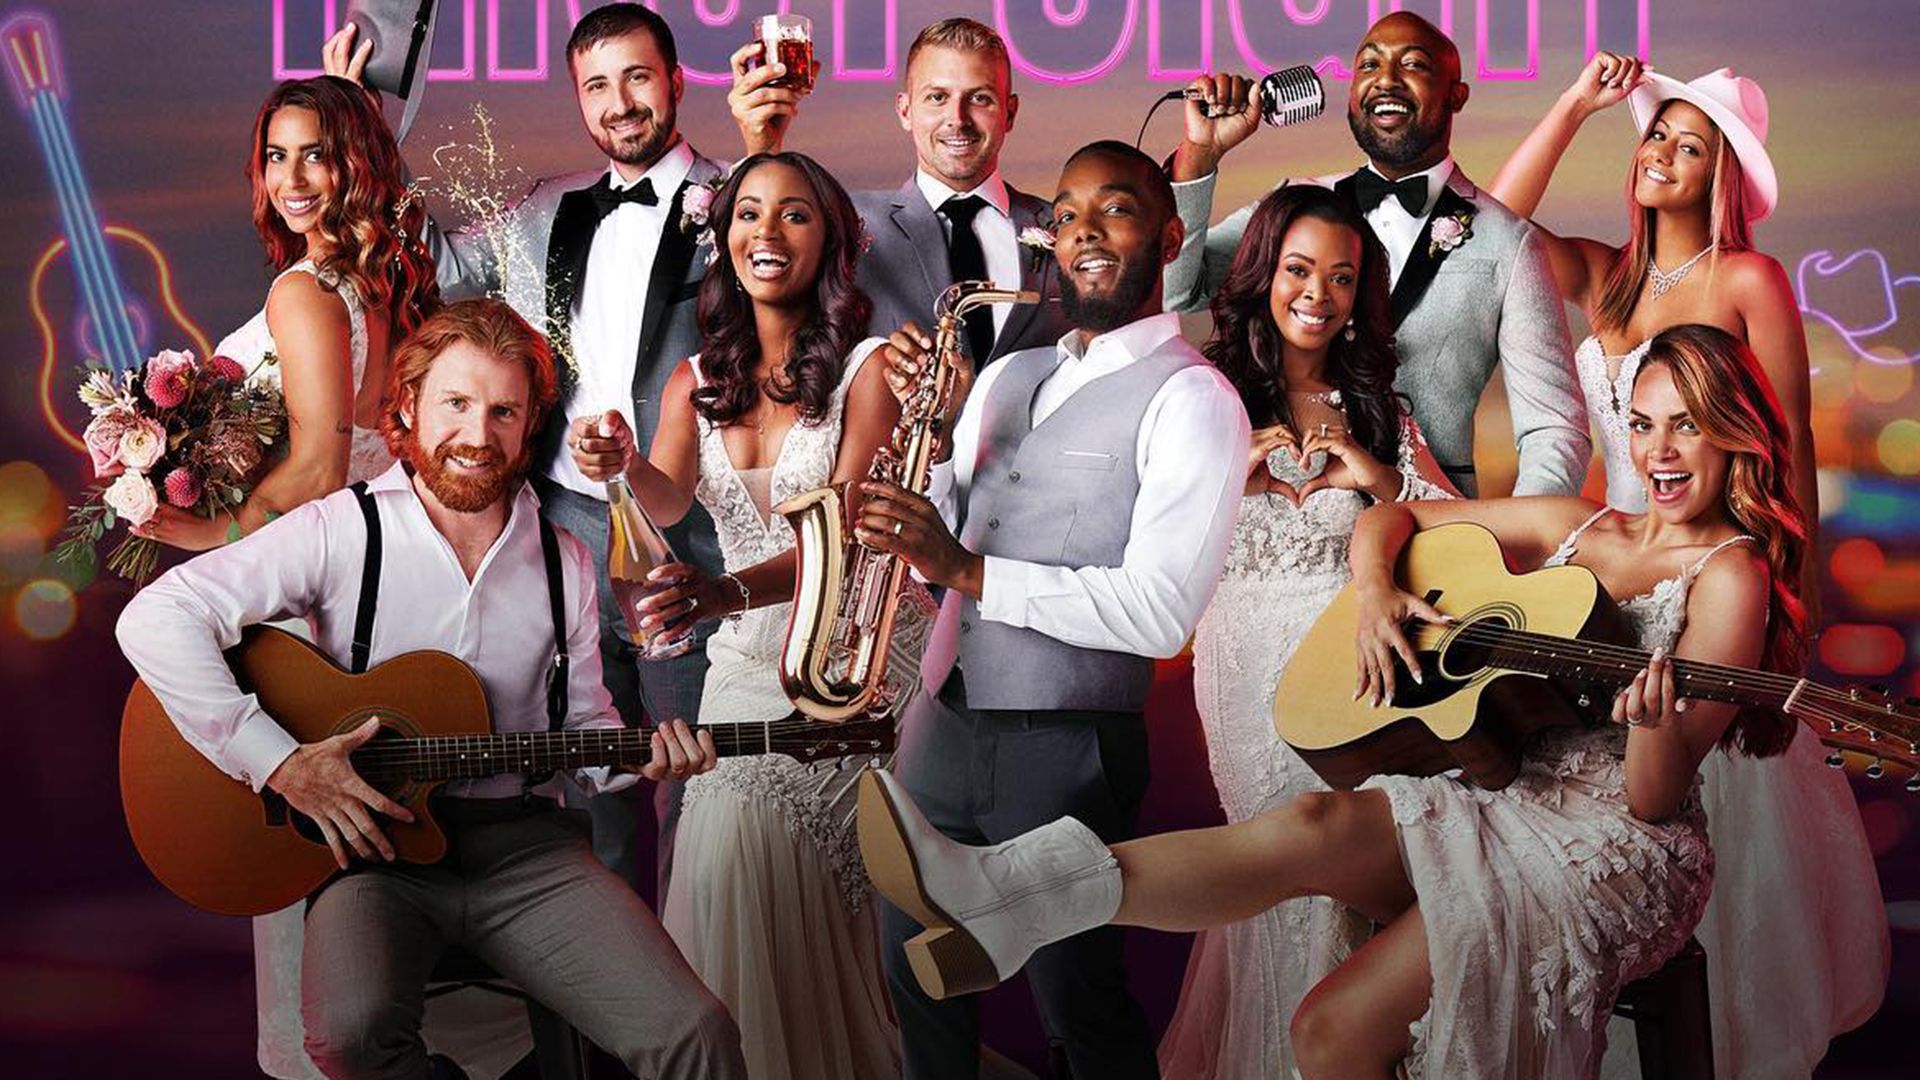 Married at First Sight Nashville contestants pose with instruments in promo photo